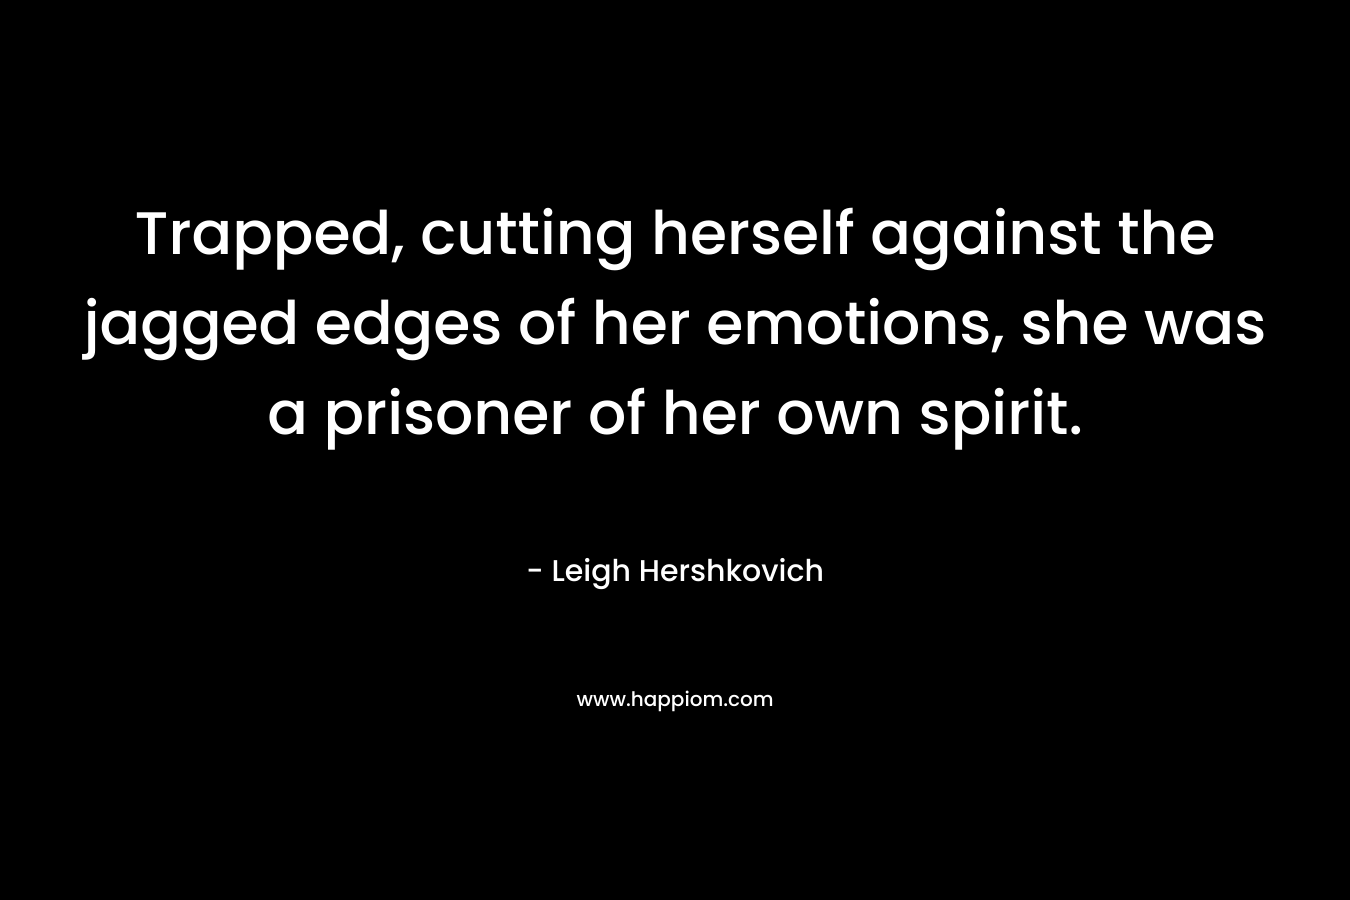 Trapped, cutting herself against the jagged edges of her emotions, she was a prisoner of her own spirit. – Leigh Hershkovich